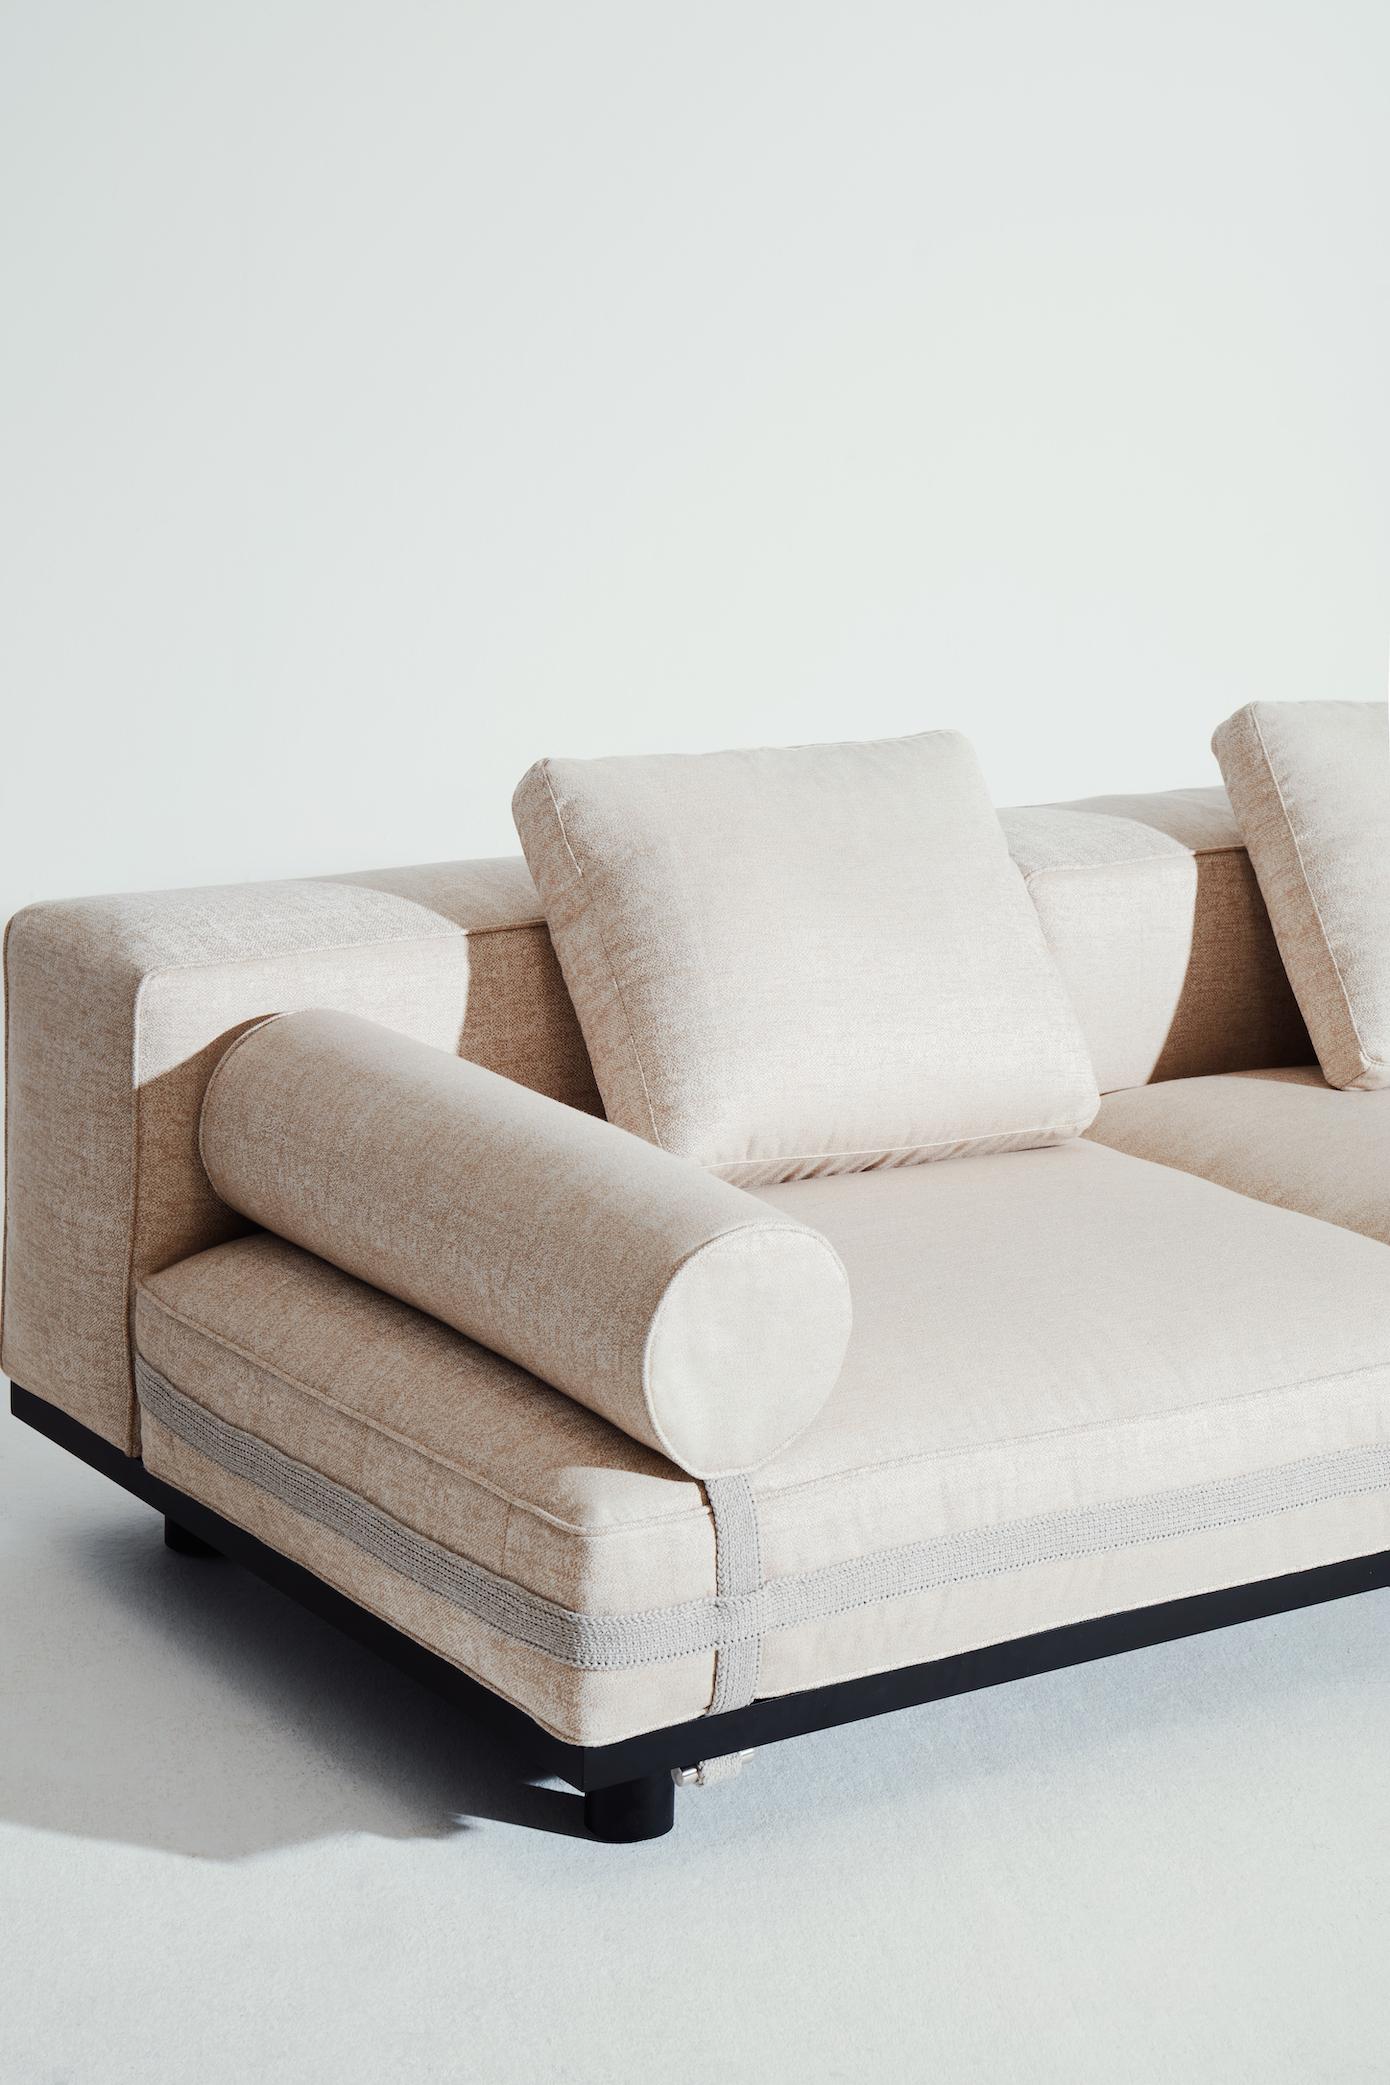 Customizable La Manufacture-Paris Saint-Rémy Sofa by Luca Nichetto In New Condition For Sale In New York, NY